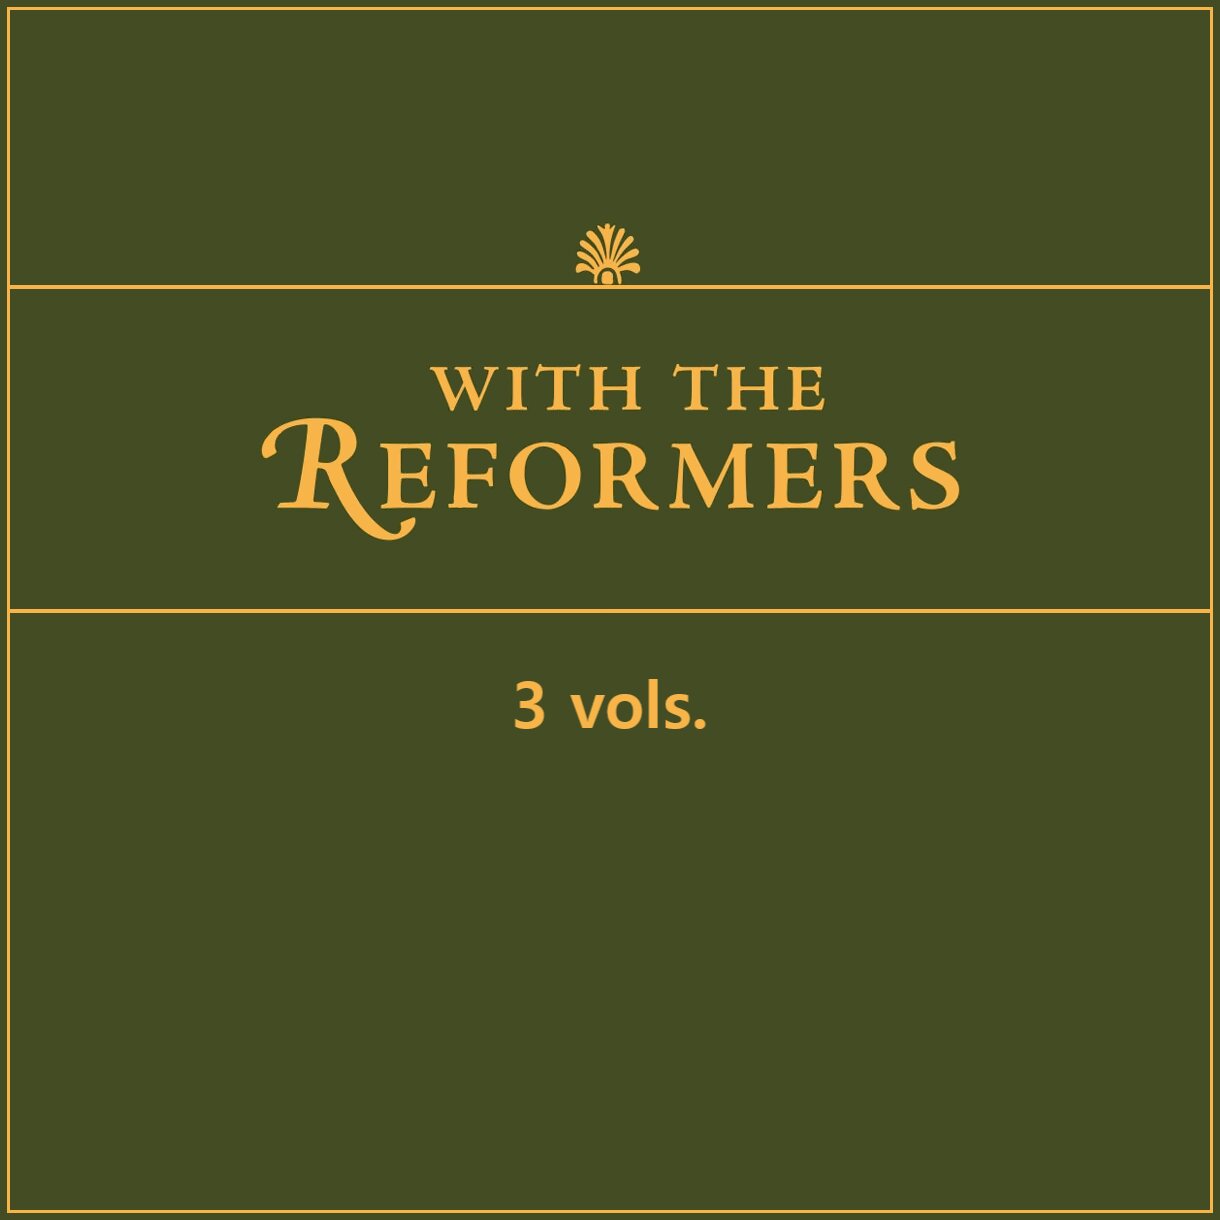 With the Reformers (3 vols.)